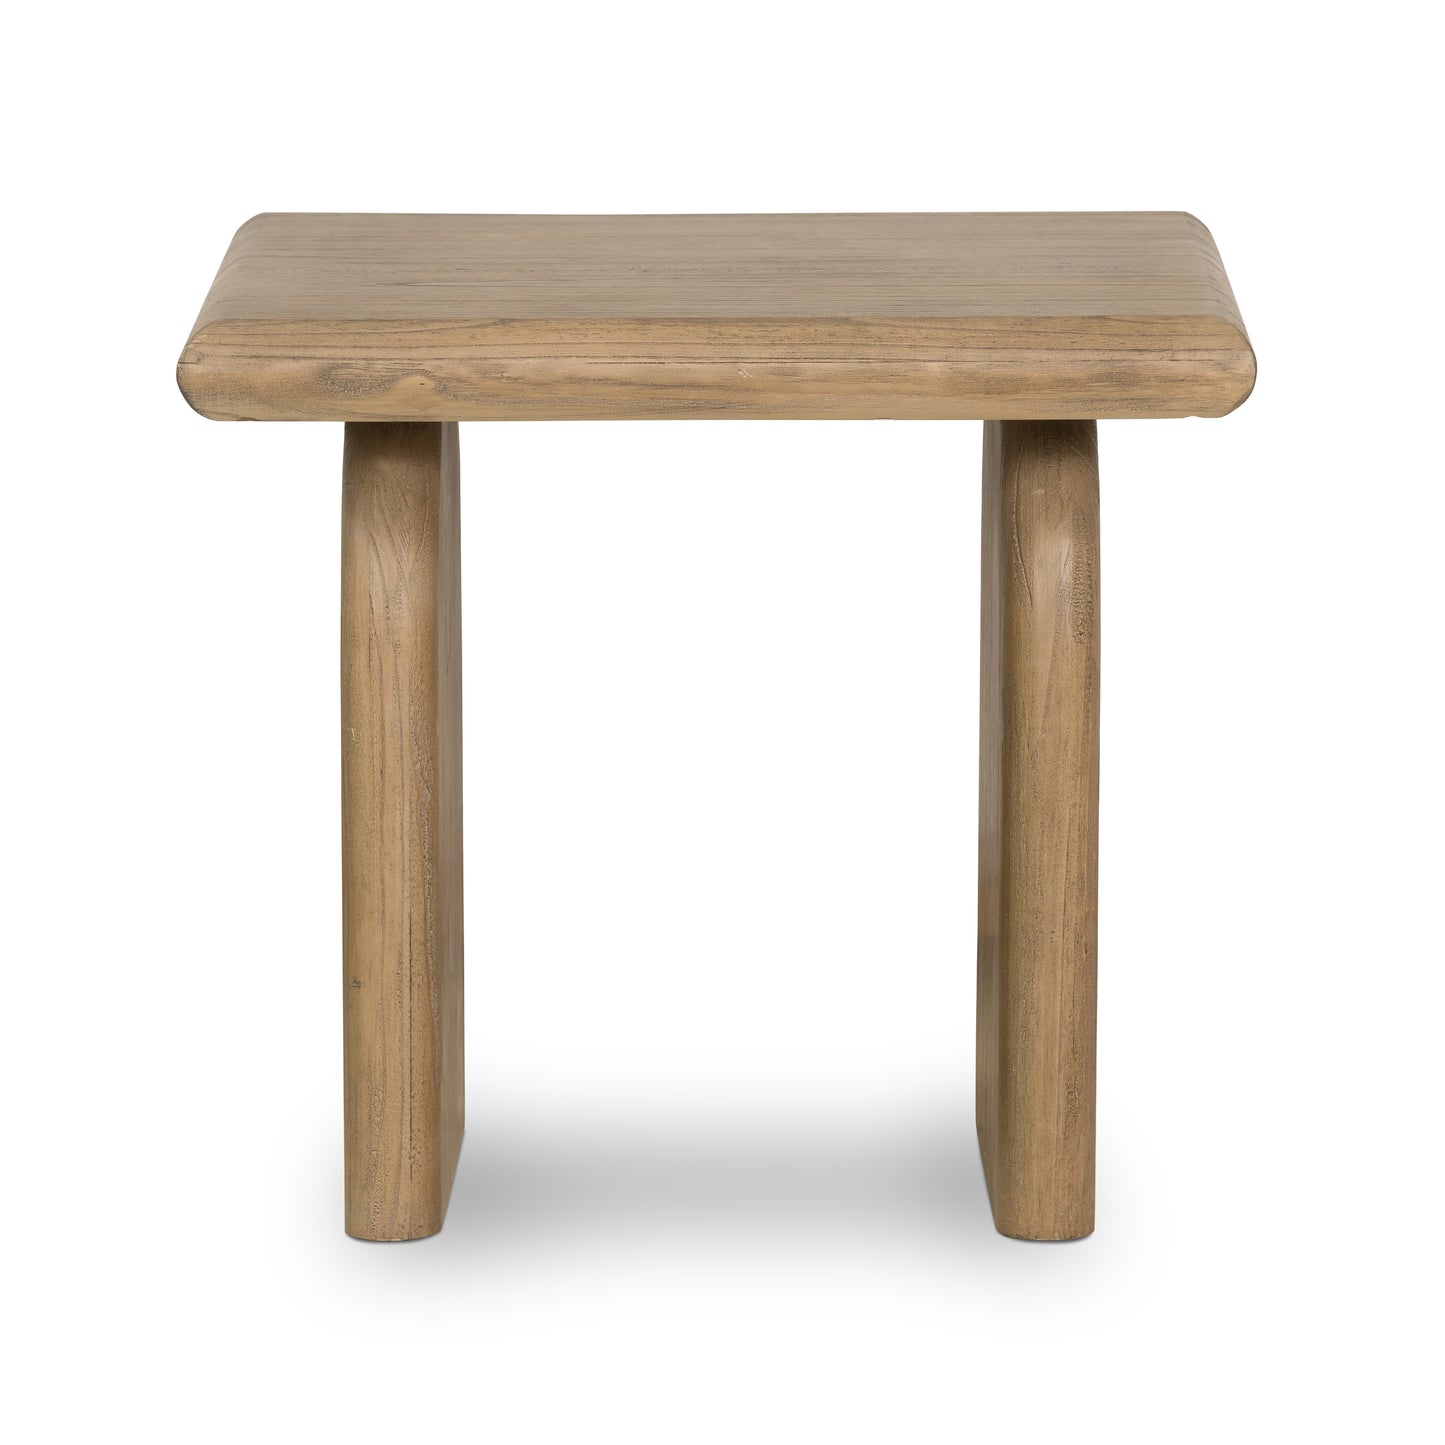 Sorrento End Table - Aged Drift Mindi End Tables Four Hands     Four Hands, Mid Century Modern Furniture, Old Bones Furniture Company, Old Bones Co, Modern Mid Century, Designer Furniture, https://www.oldbonesco.com/